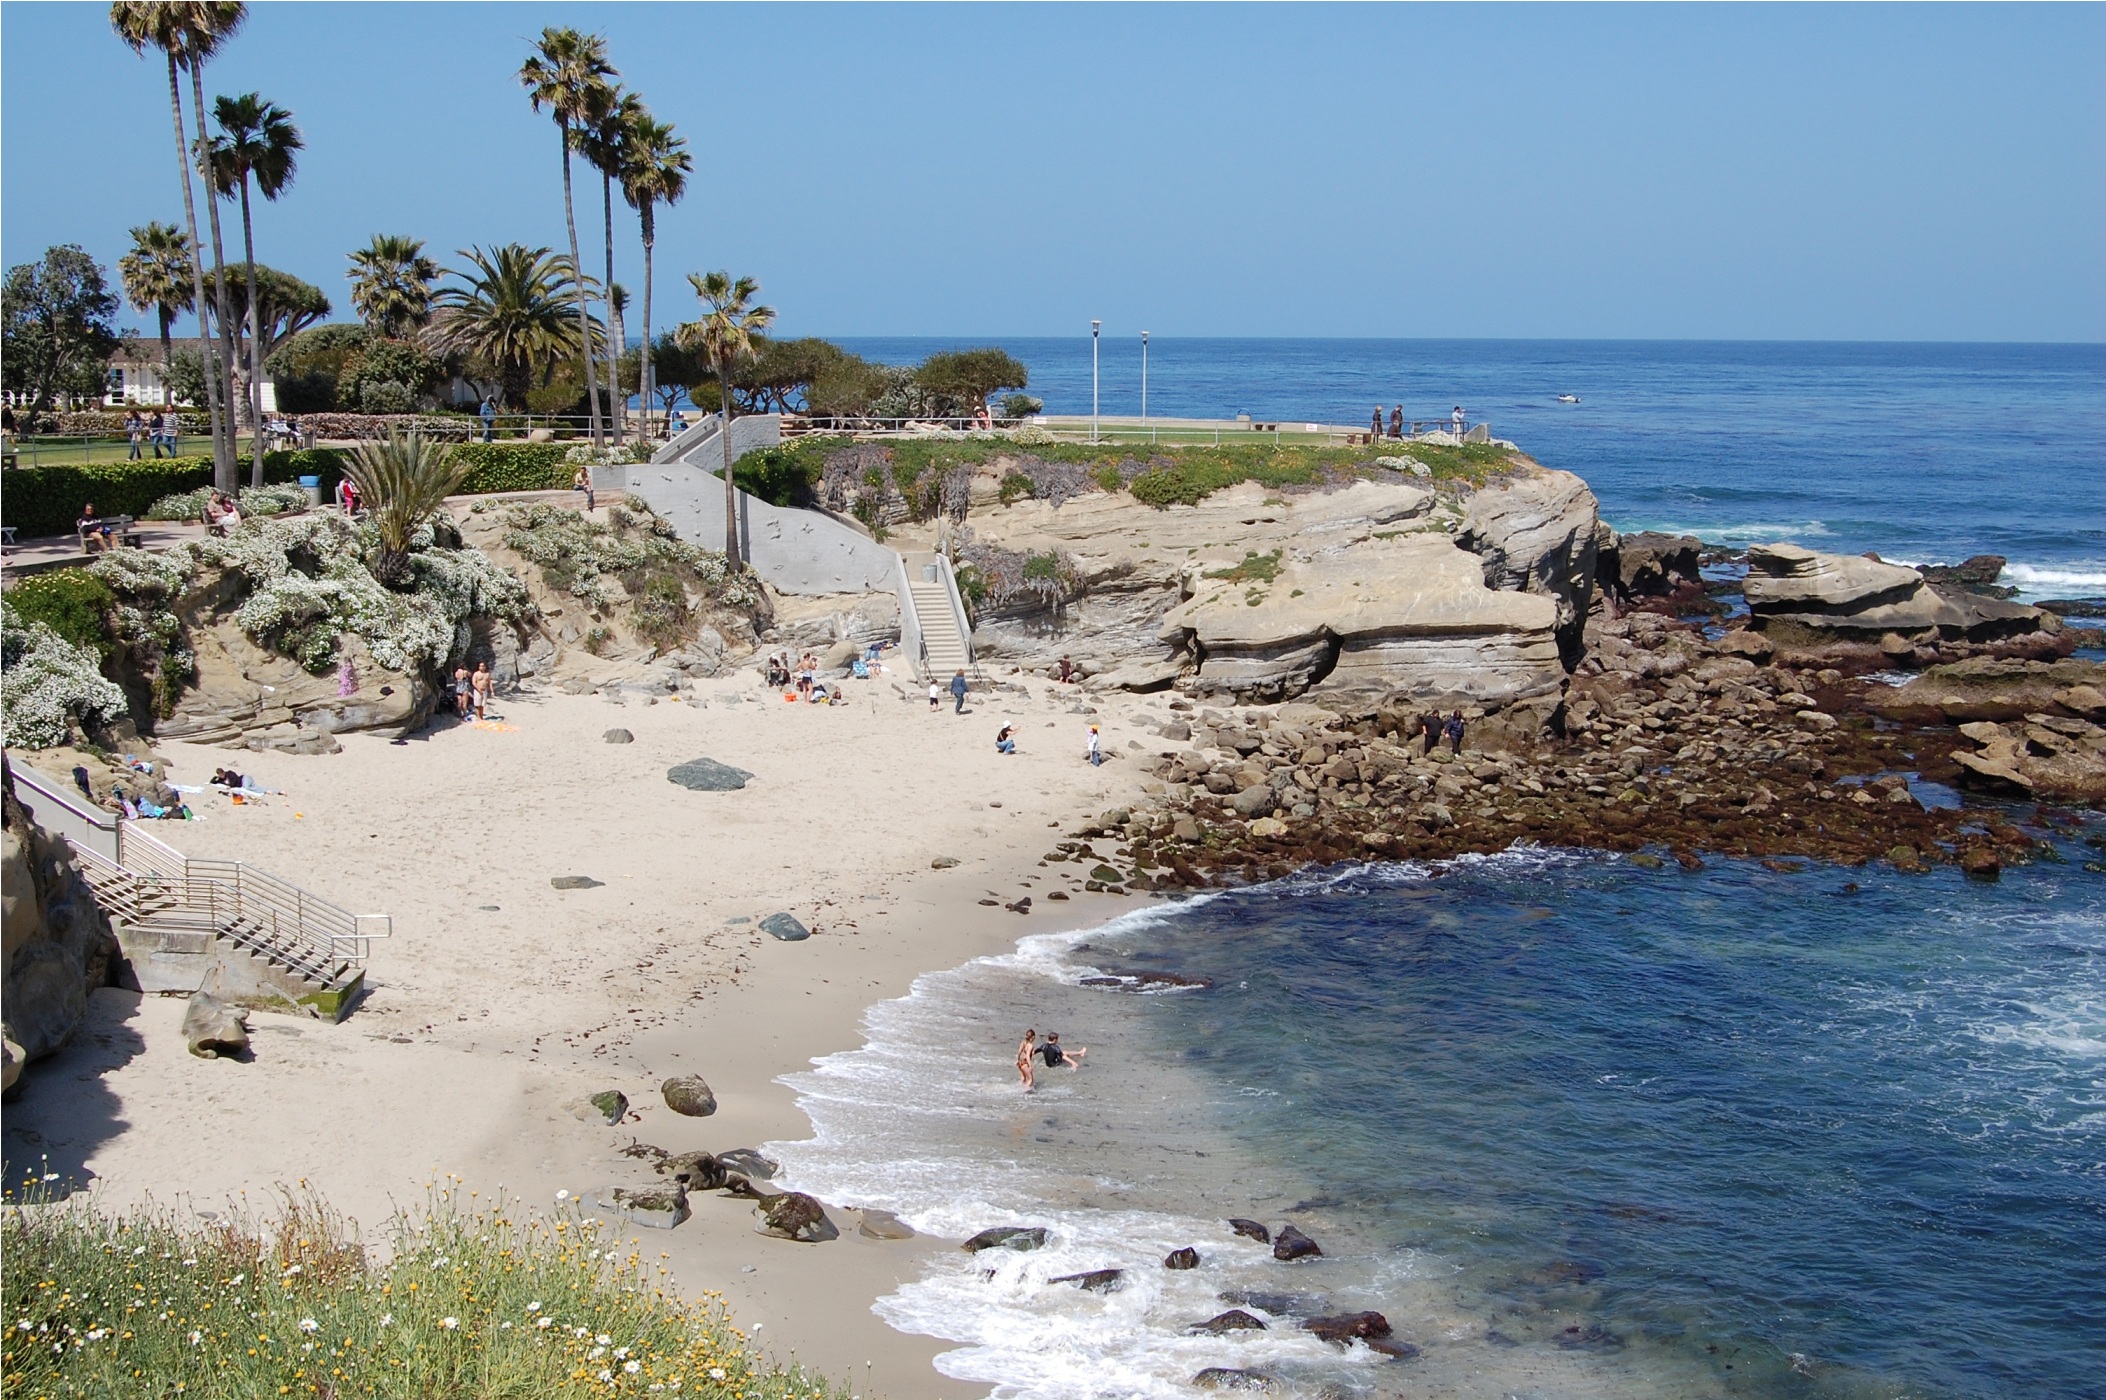 La Jolla Cove, A Paradise For Swimming and Diving - Traveldigg.com